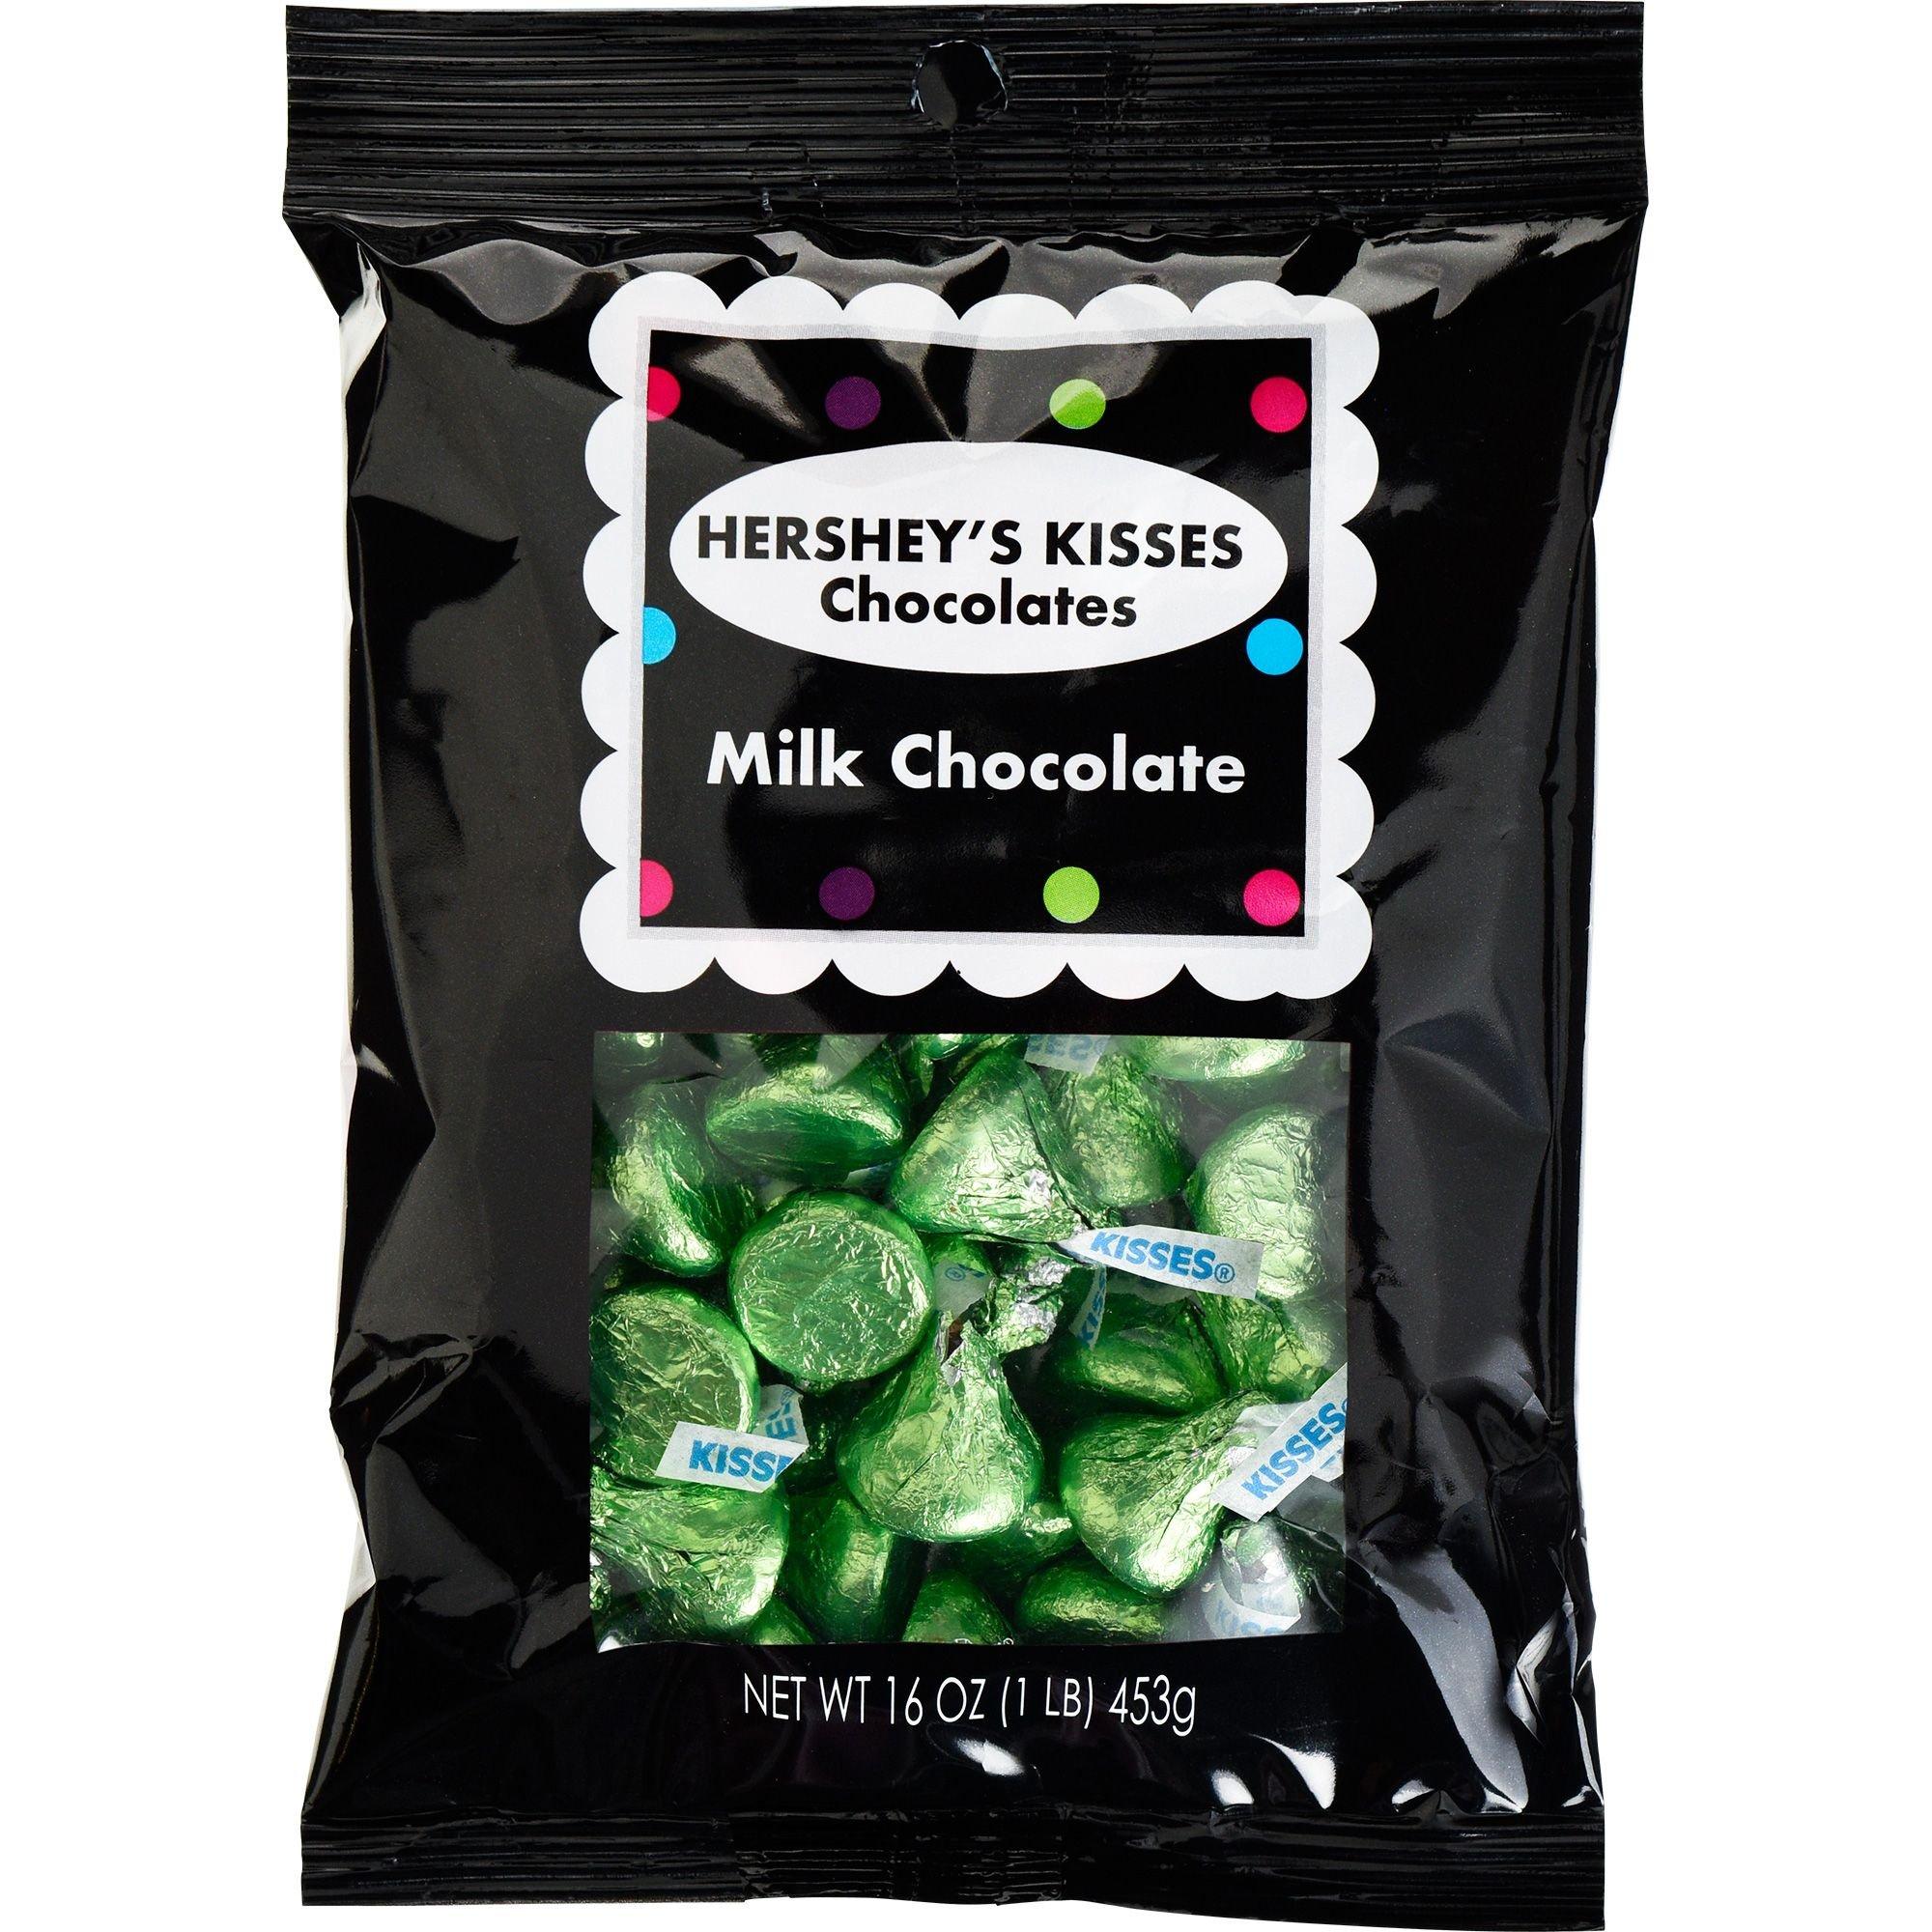 My M & M's Chocolate Candy Green 1 LB (453g)